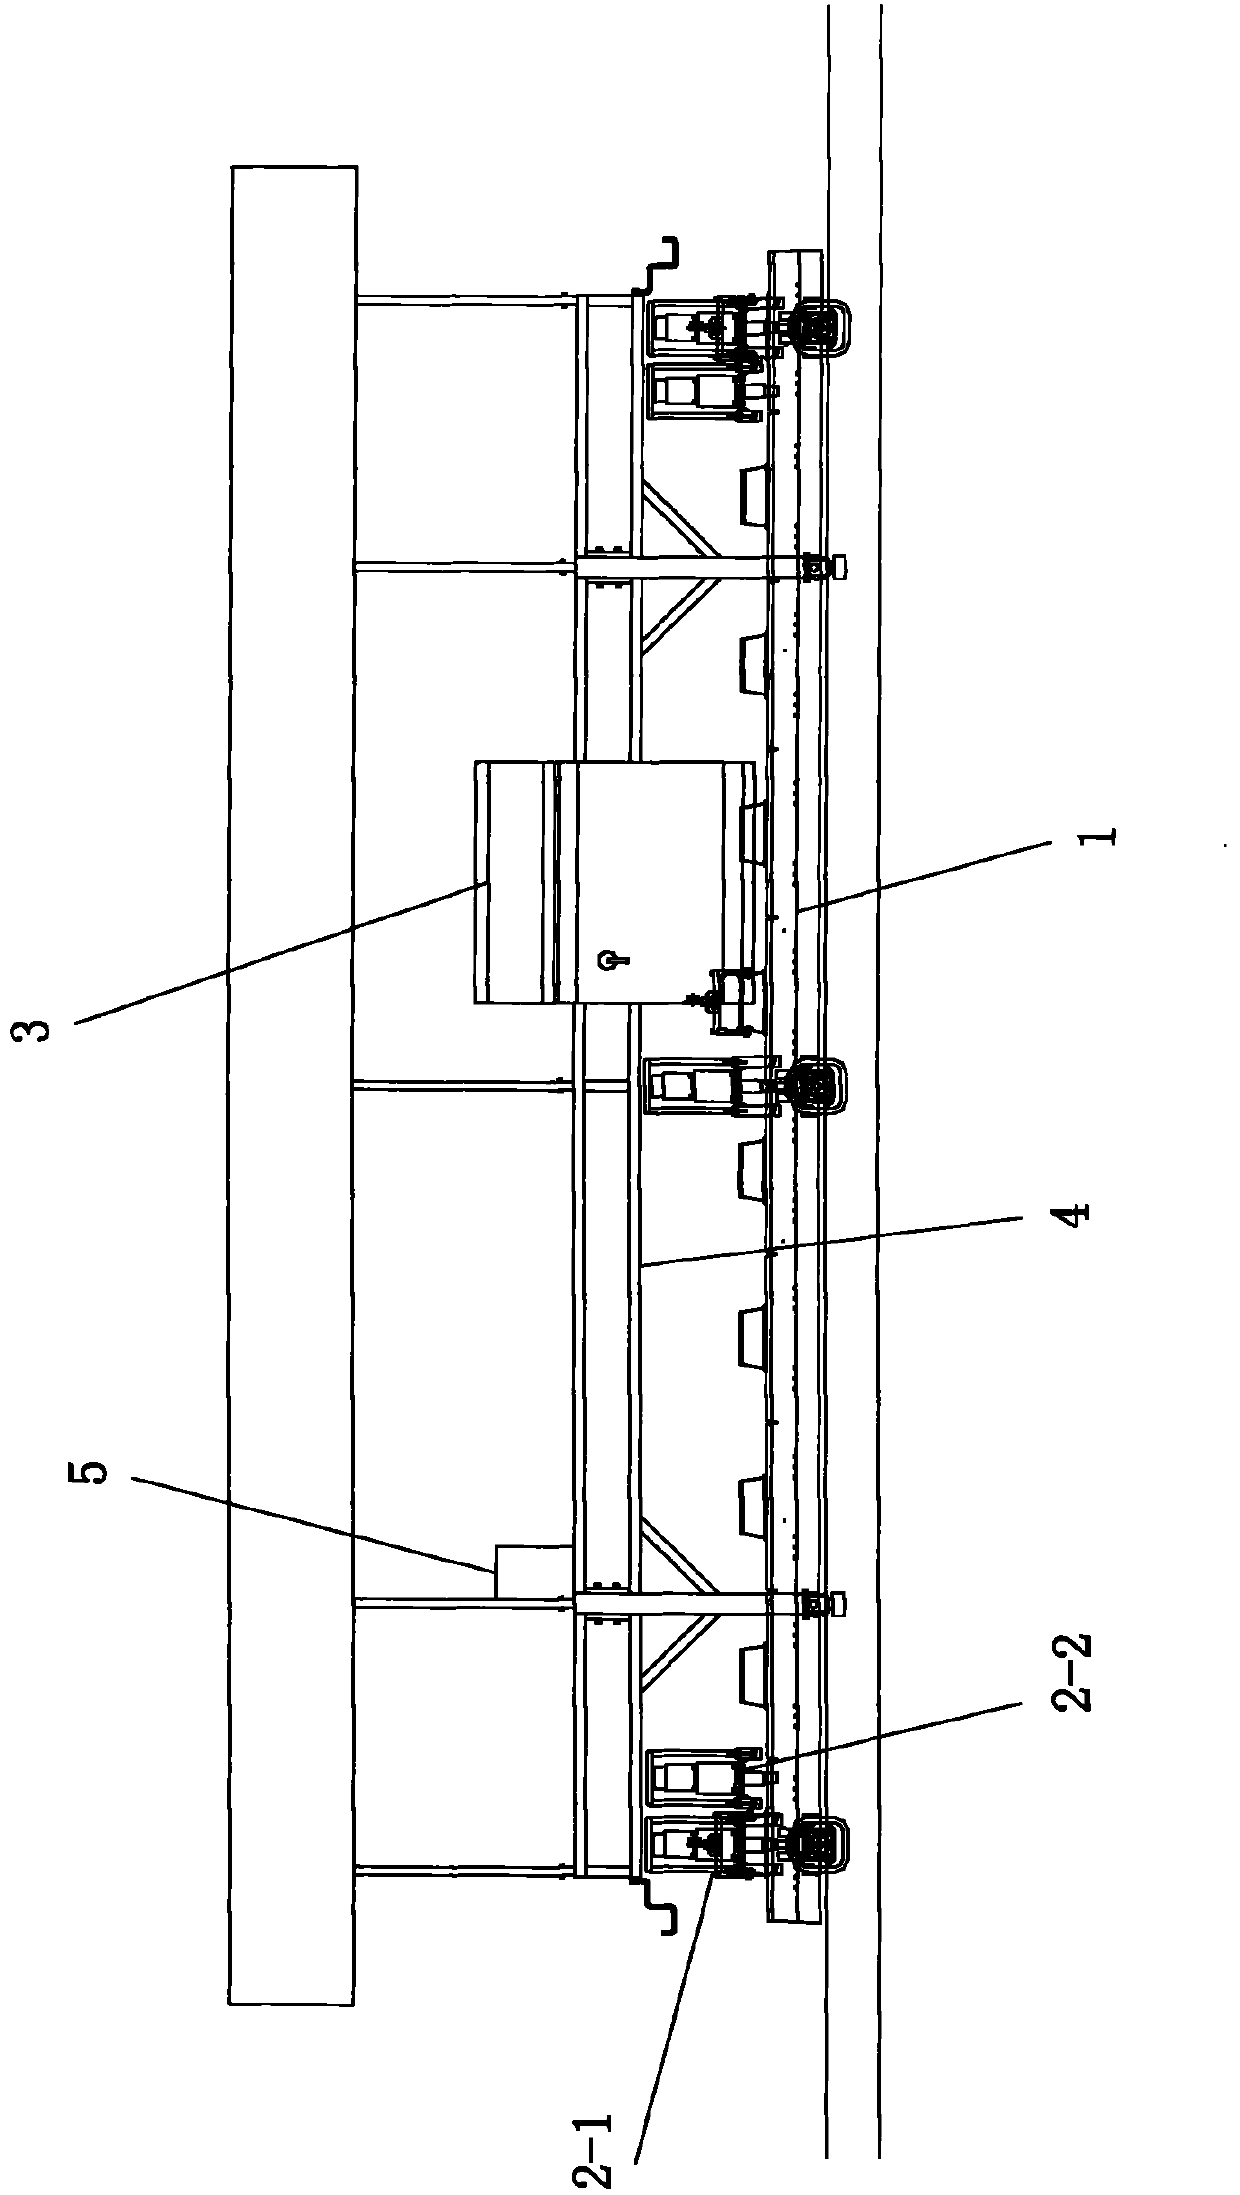 Full-automatic accurate adjustment device for track plate of ballastless track of rapid transit railway